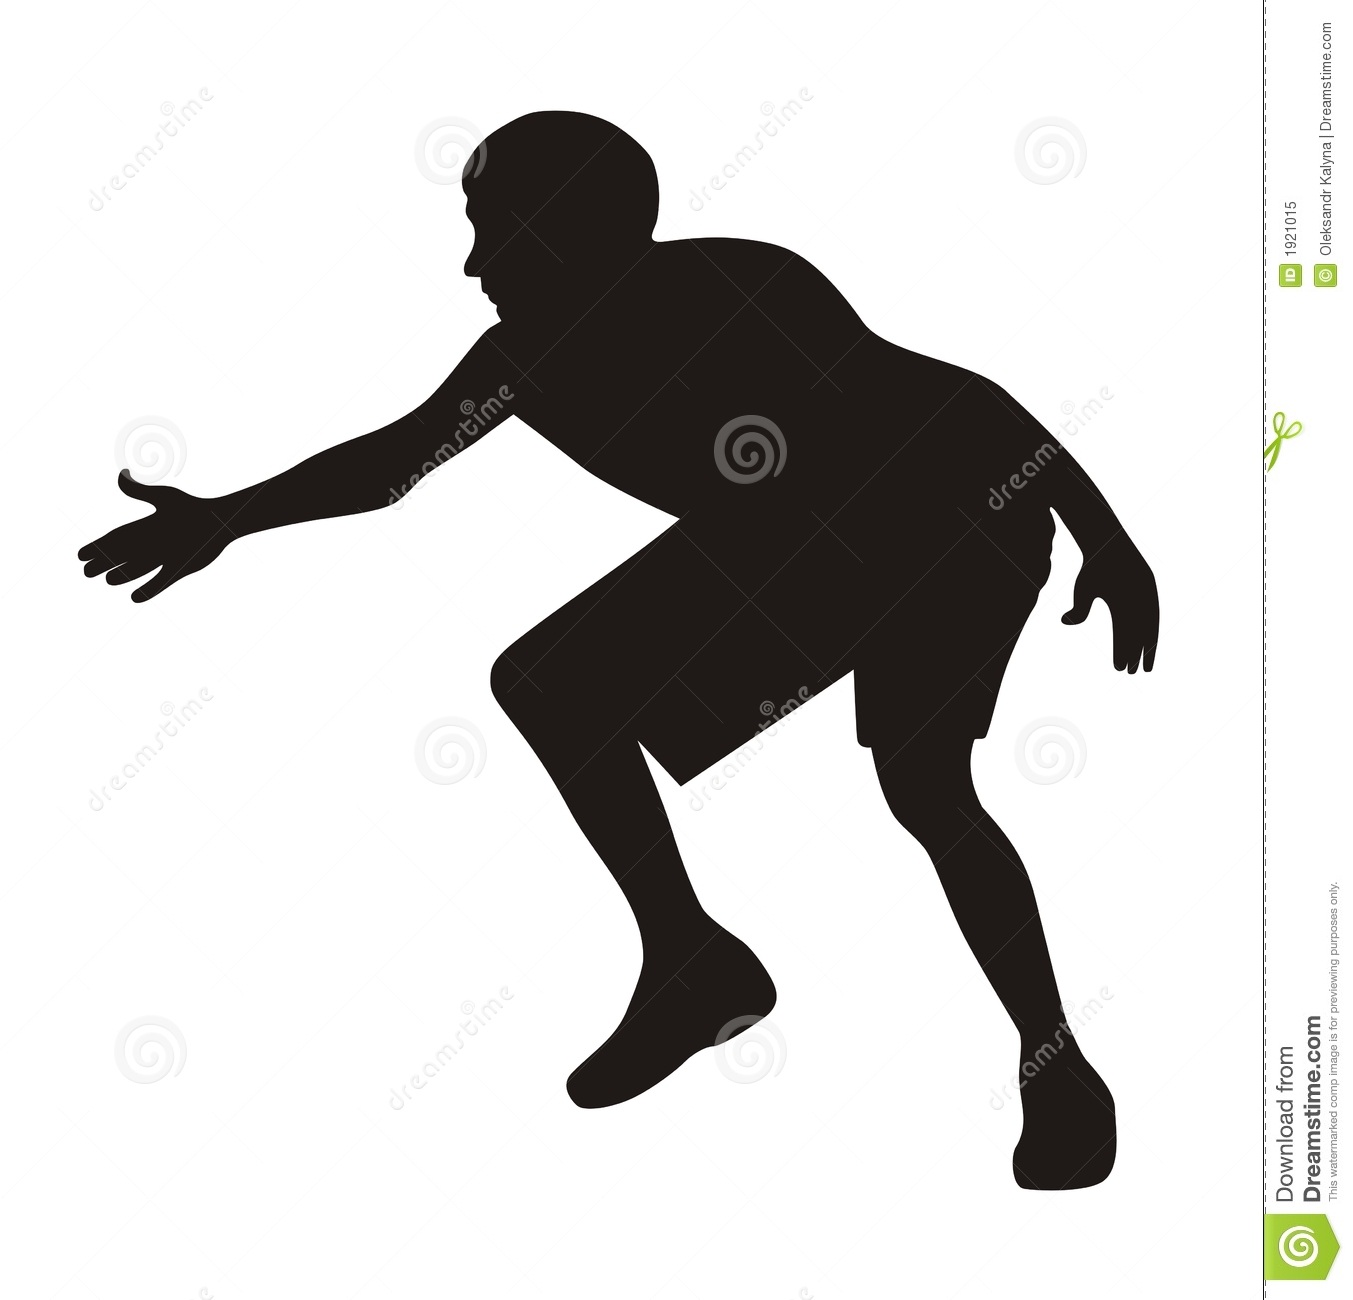 Silhouette Of Basketball Player Royalty Free Stock Photo   Image